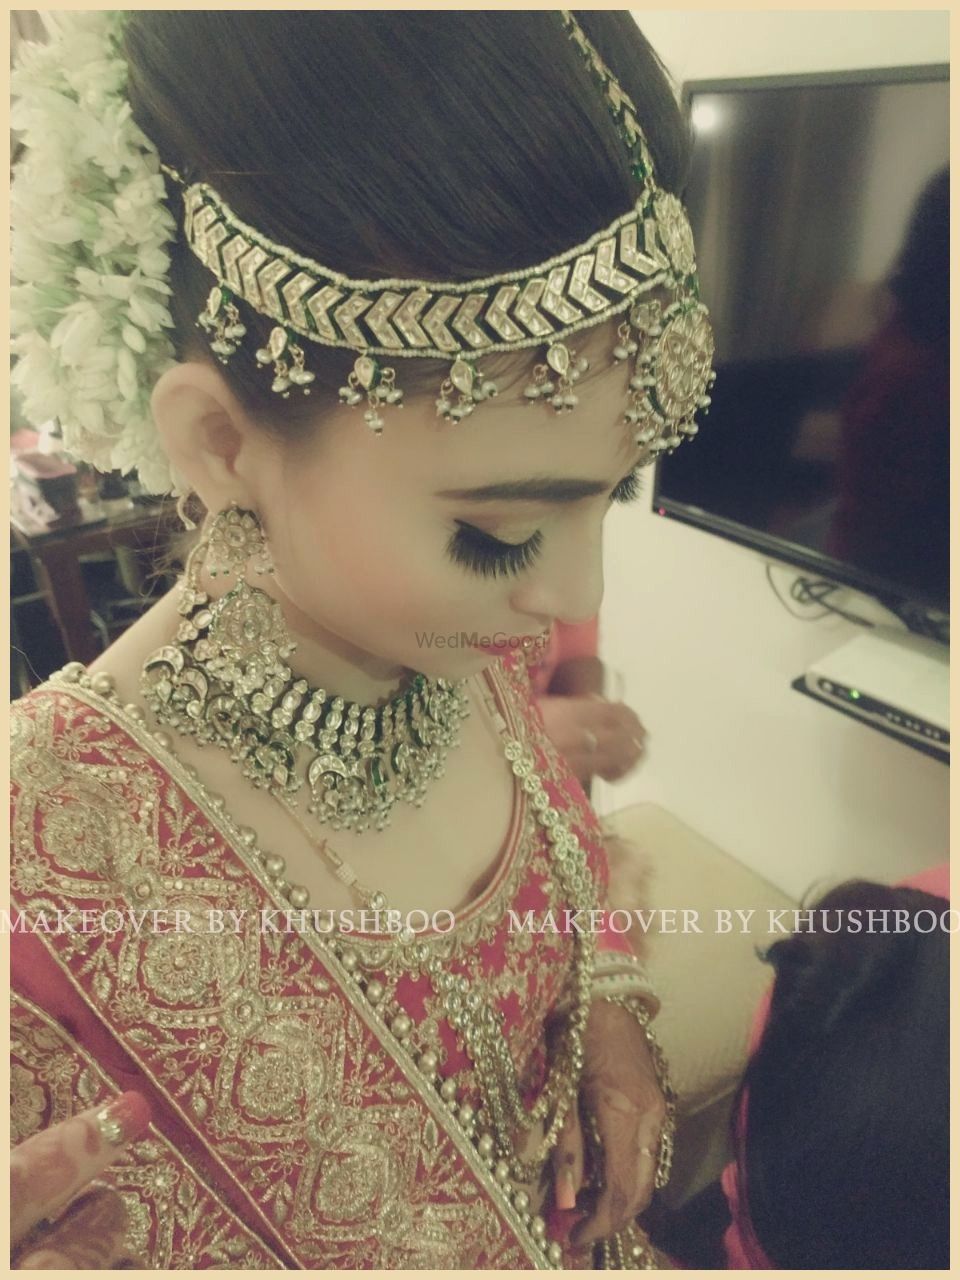 Photo From Bridal, Engagement & Party Makeup Look - By Khushboo Mishra